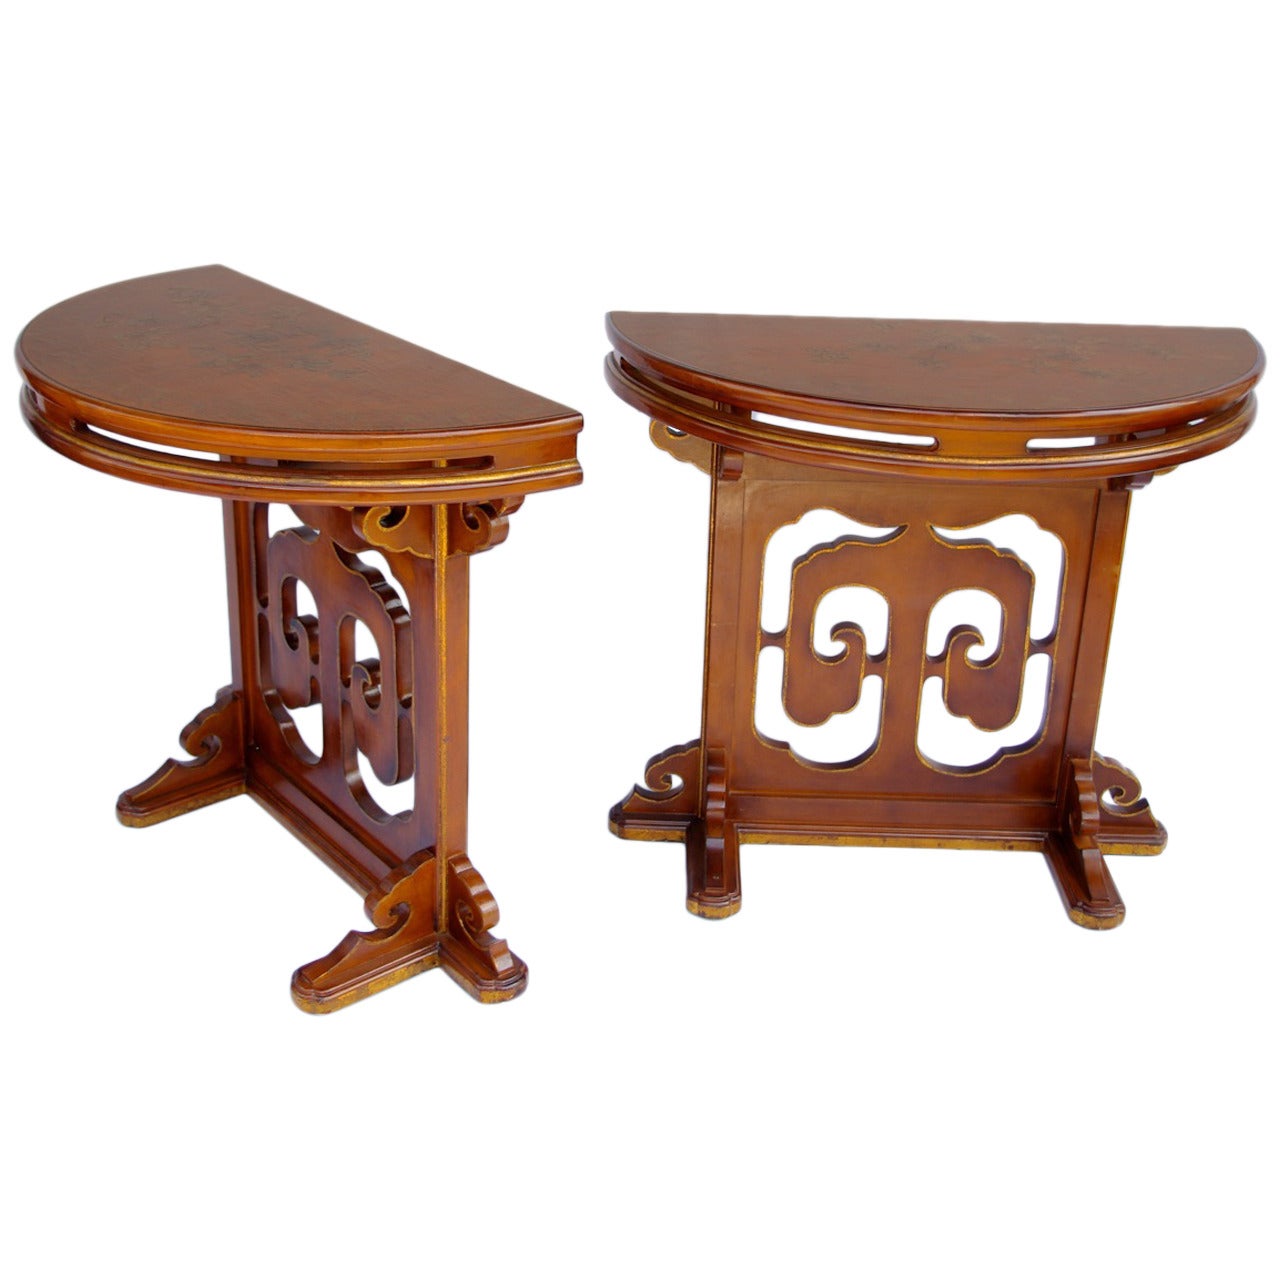 Pair of openwork Lacquer Consoles from 1900